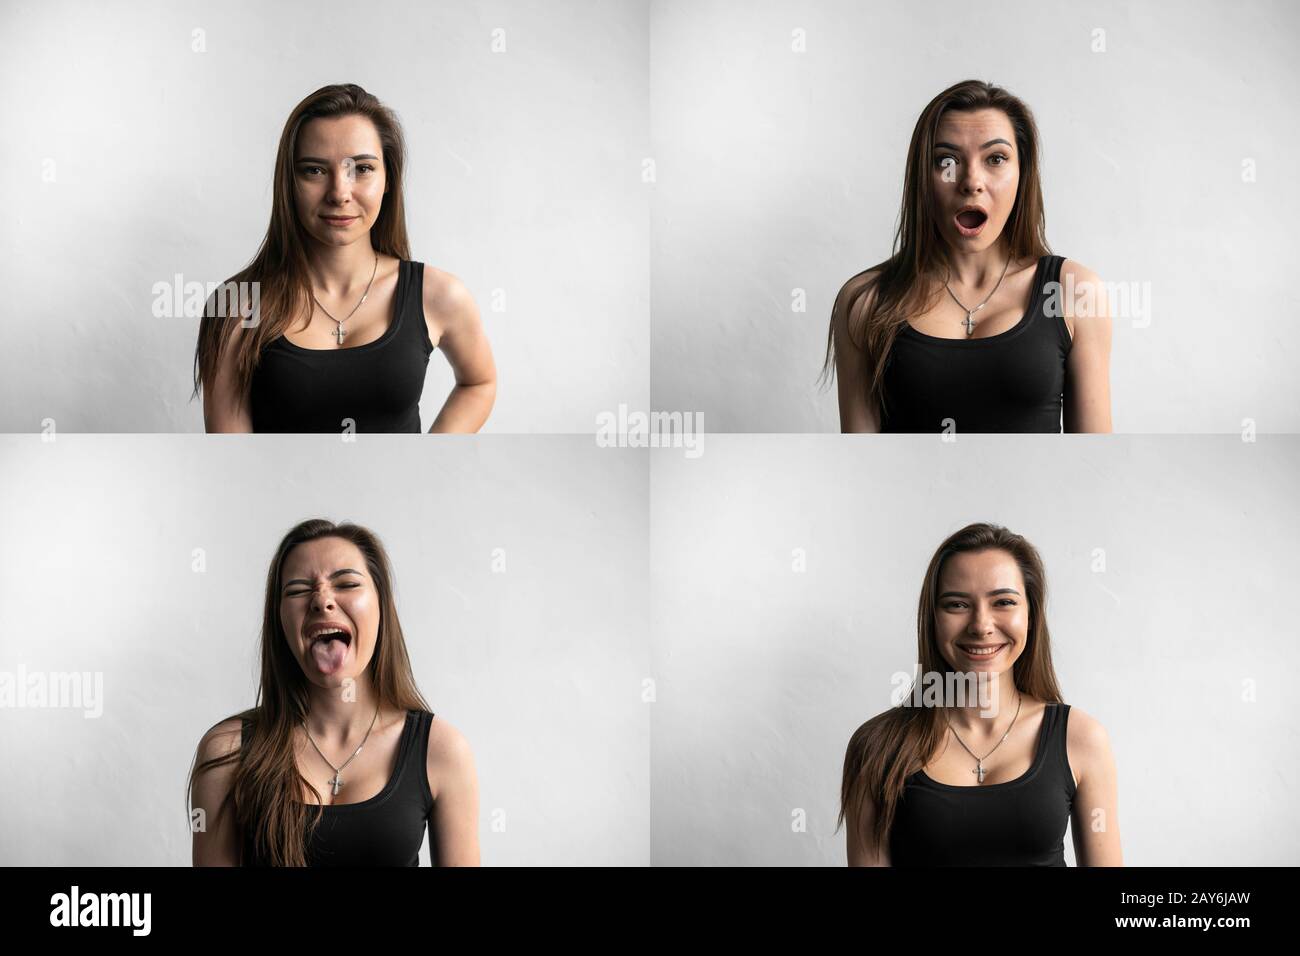 Set of young woman's portraits with different emotions. Young beautiful cute girl showing different emotions. Laughing, smiling, anger, suspicion, fea Stock Photo